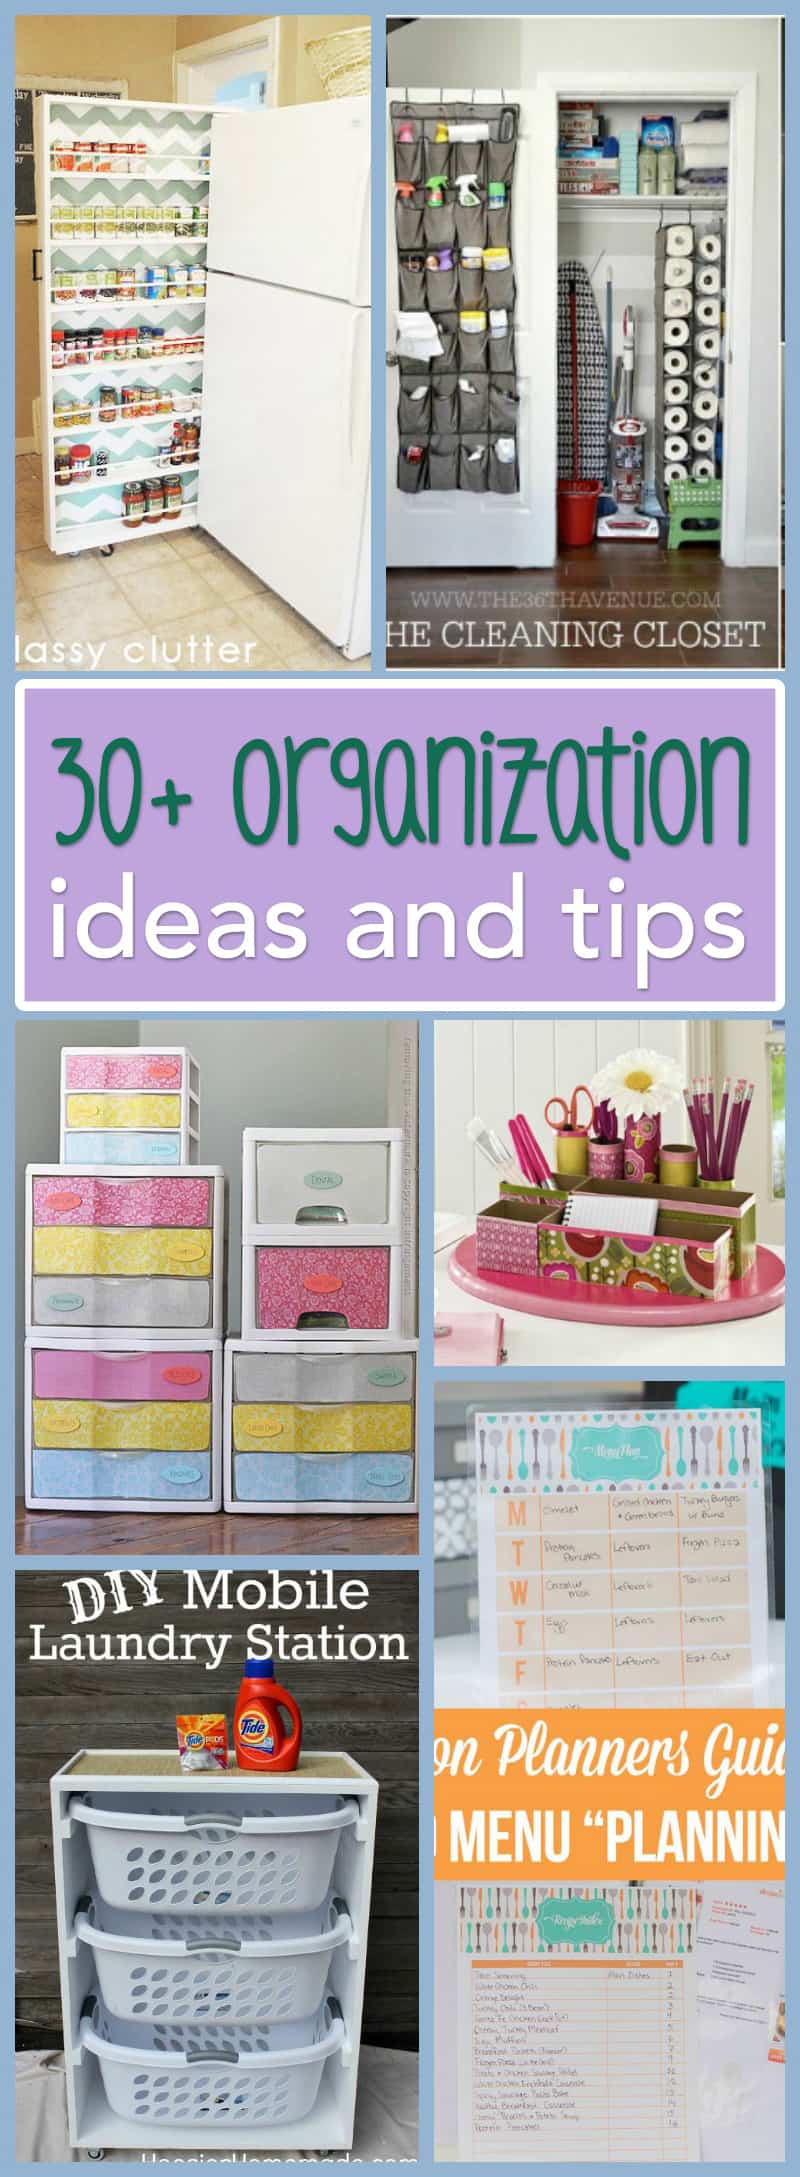 30+ Organization Ideas and Tips